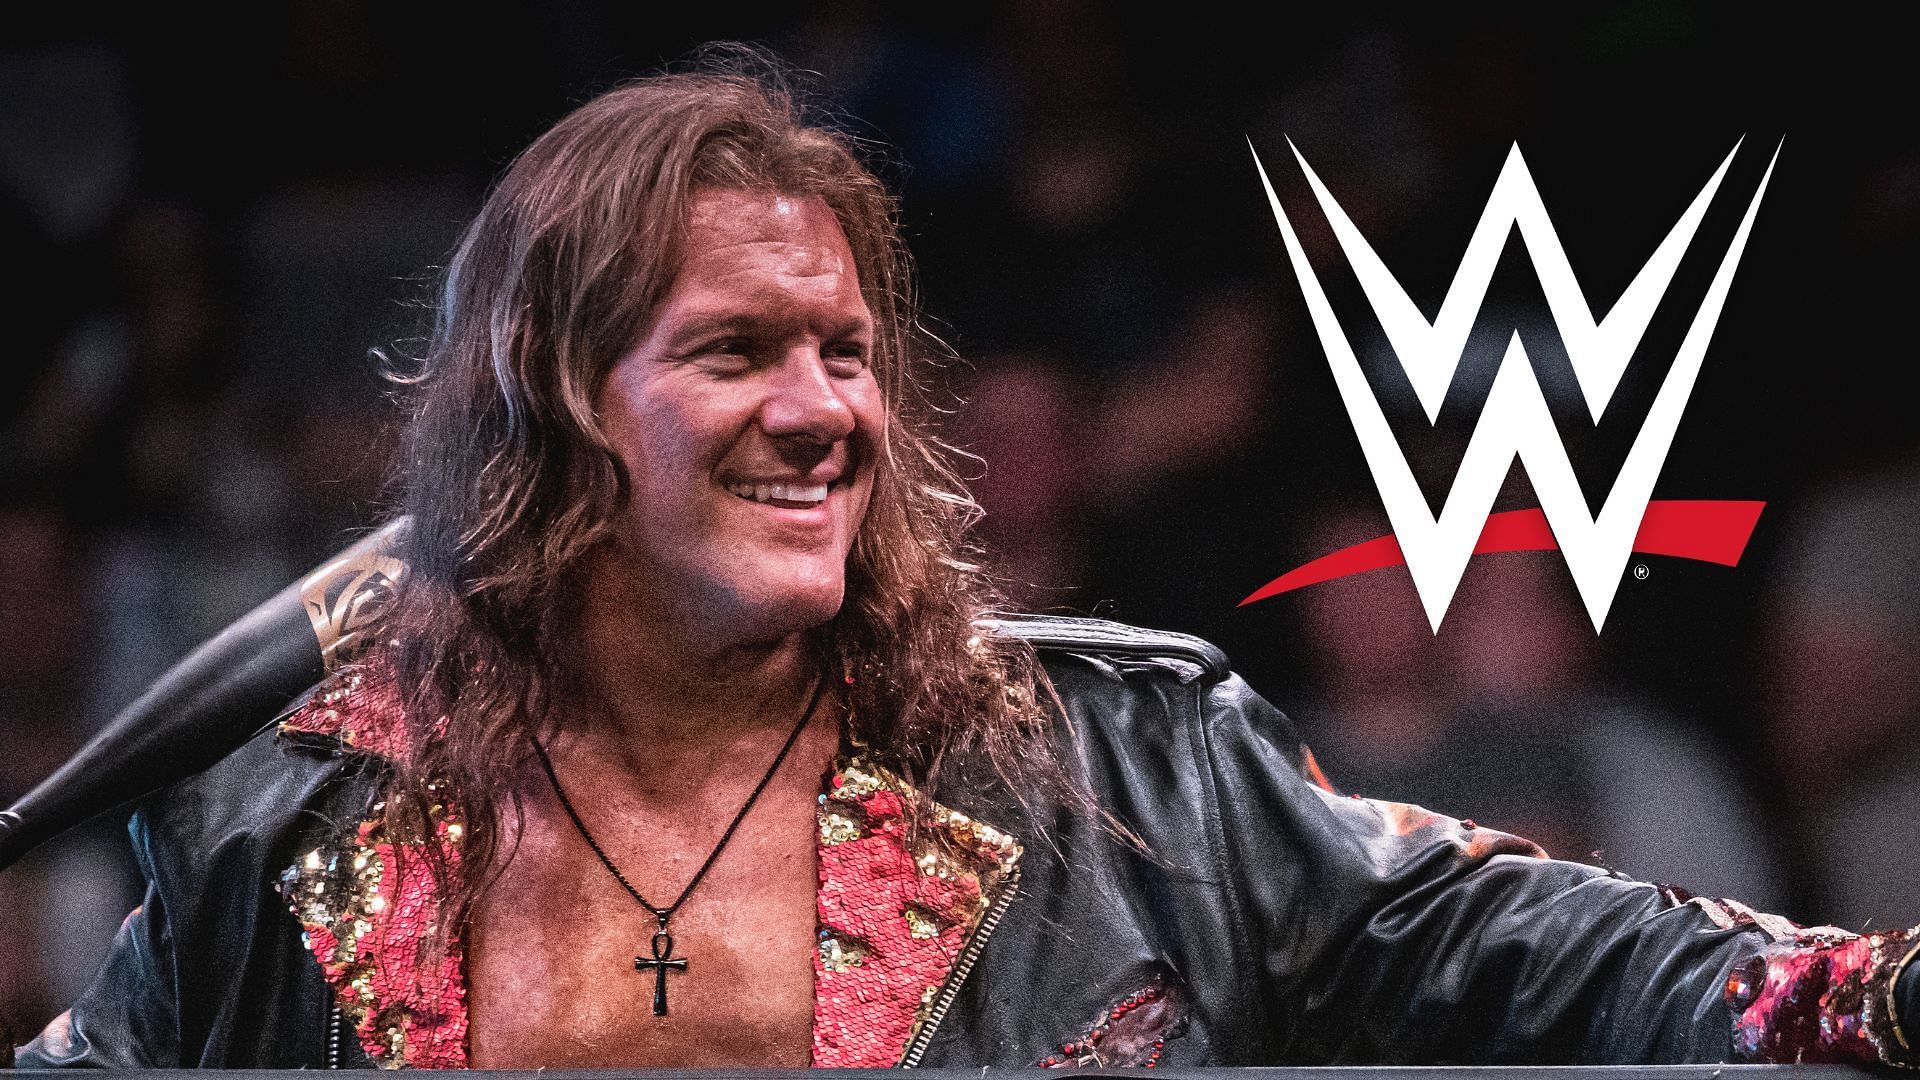 Chris Jericho wants AEW to re-sign one of their top stars